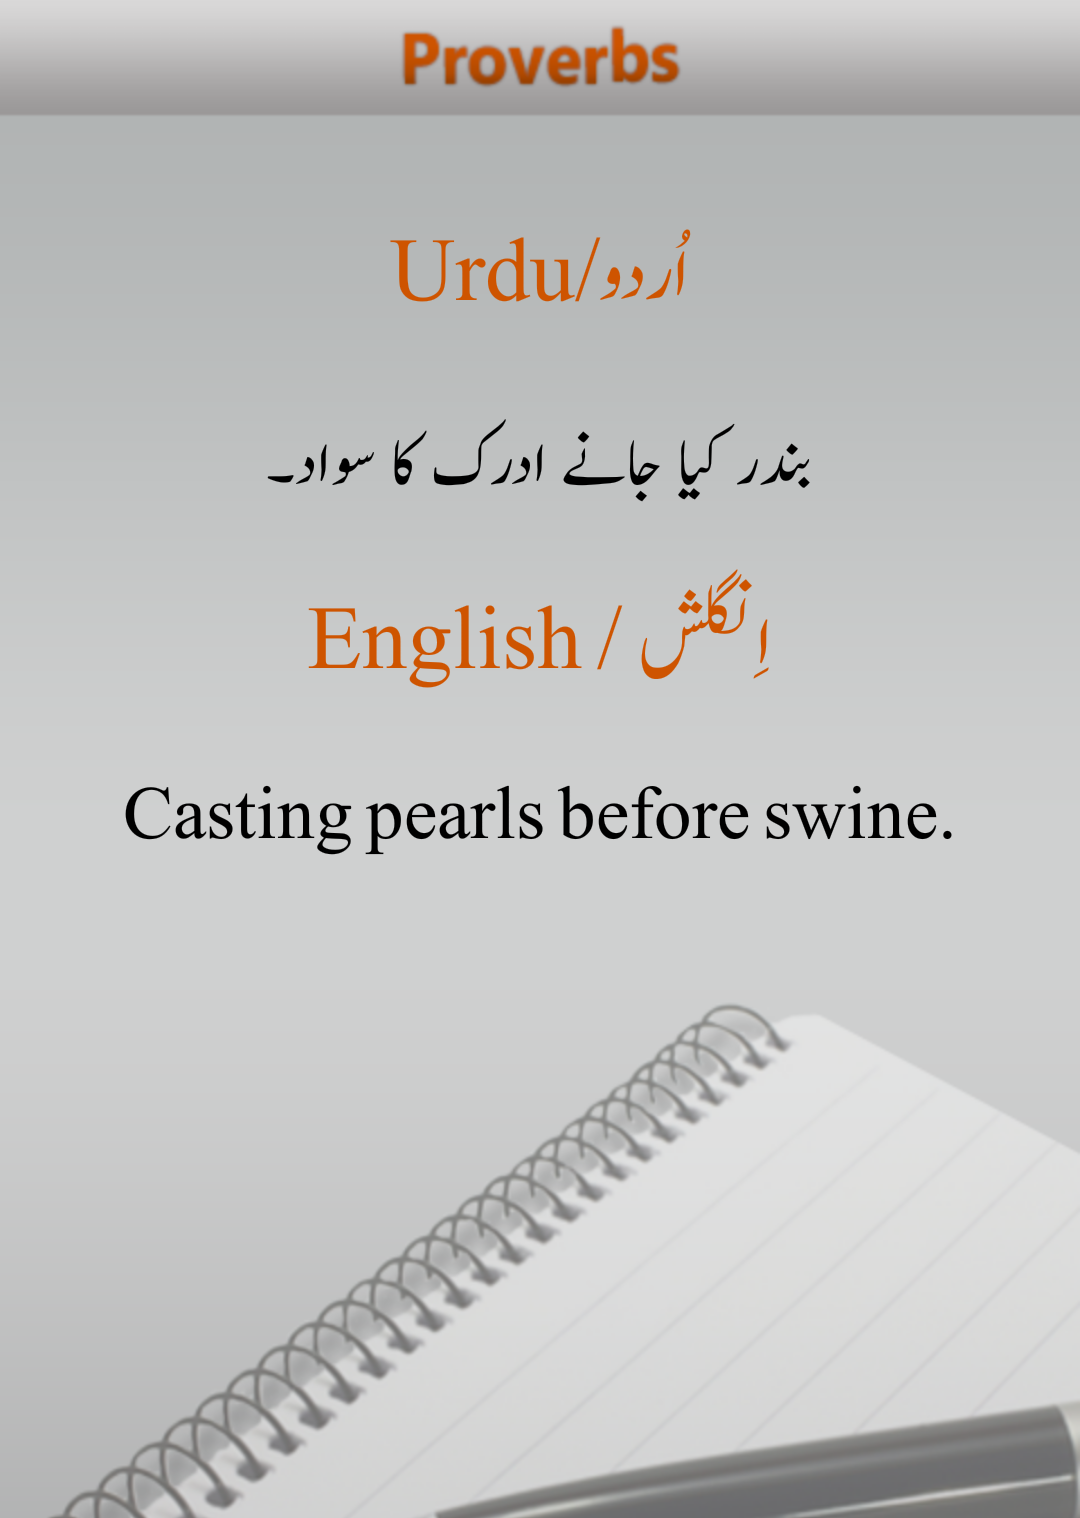 Clutching Meaning In Urdu, Chheen Lena چھین لینا